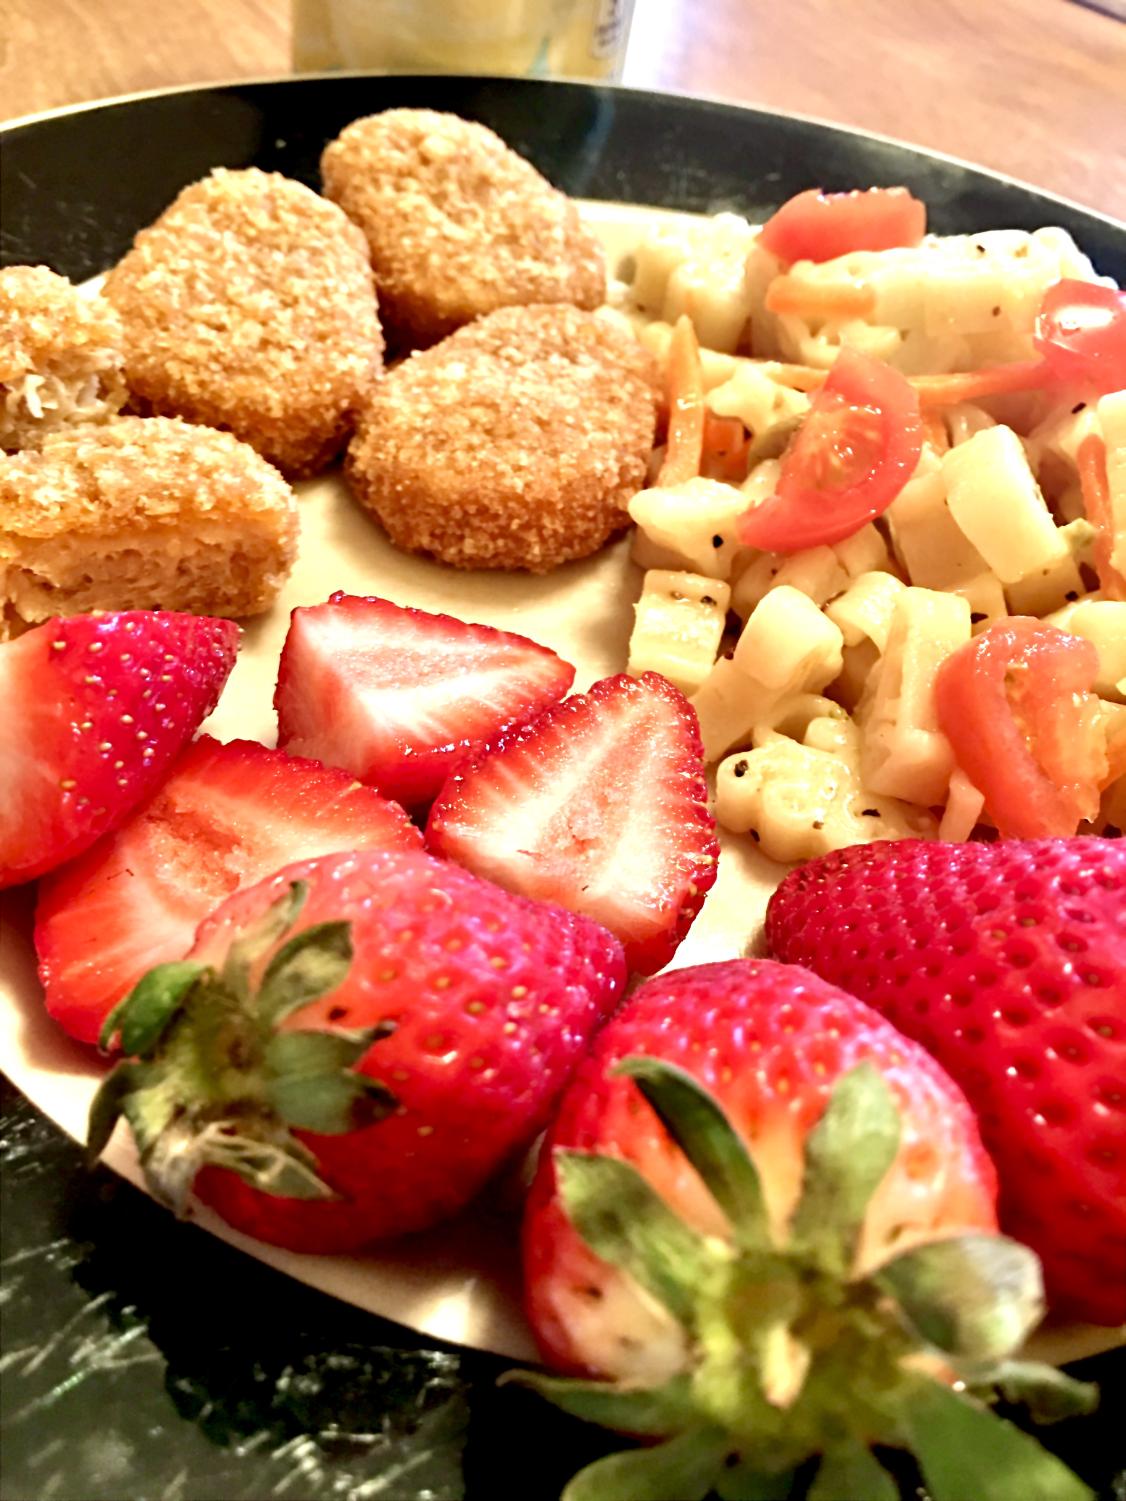 Vegan meal consisting of strawberries, vegan chicken nuggets and pasta with a vinaigrette dressing